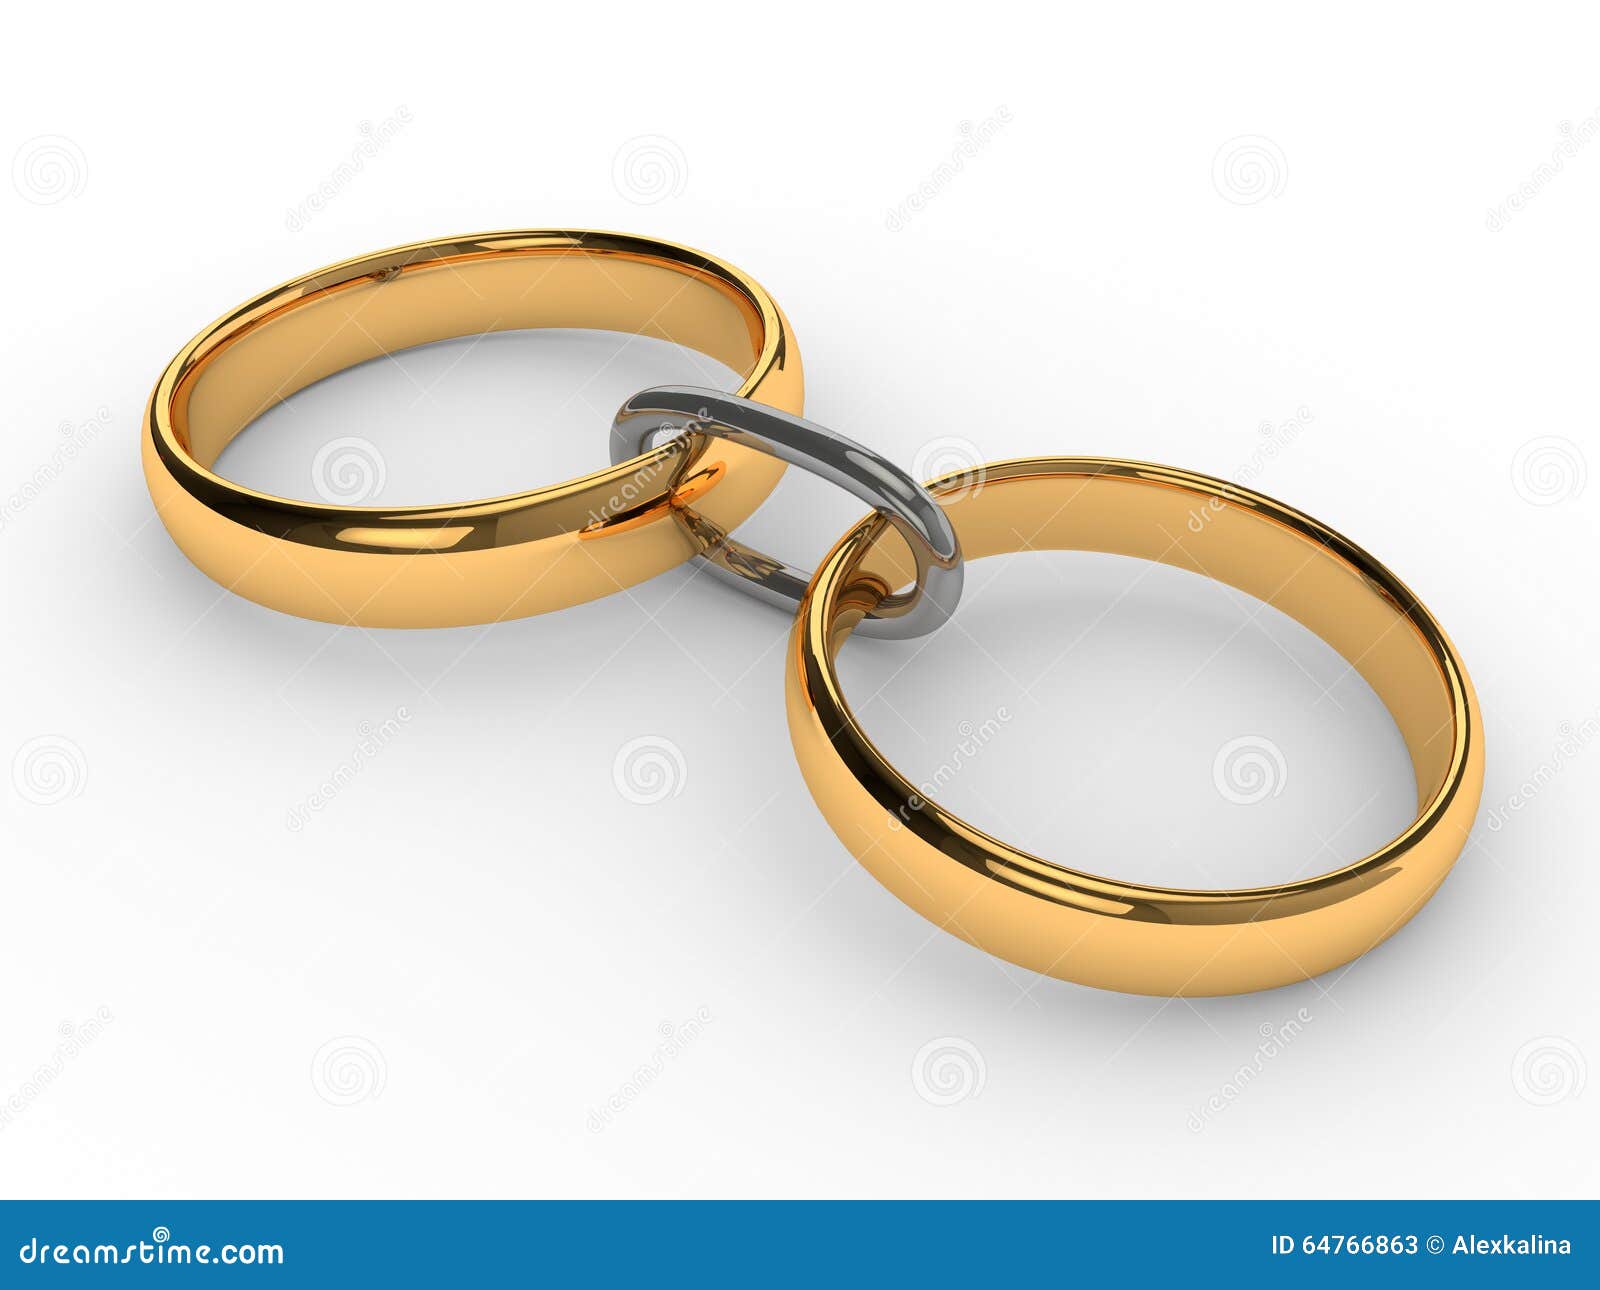  Wedding  Gold Rings  Connected  Chain Stock Illustration 